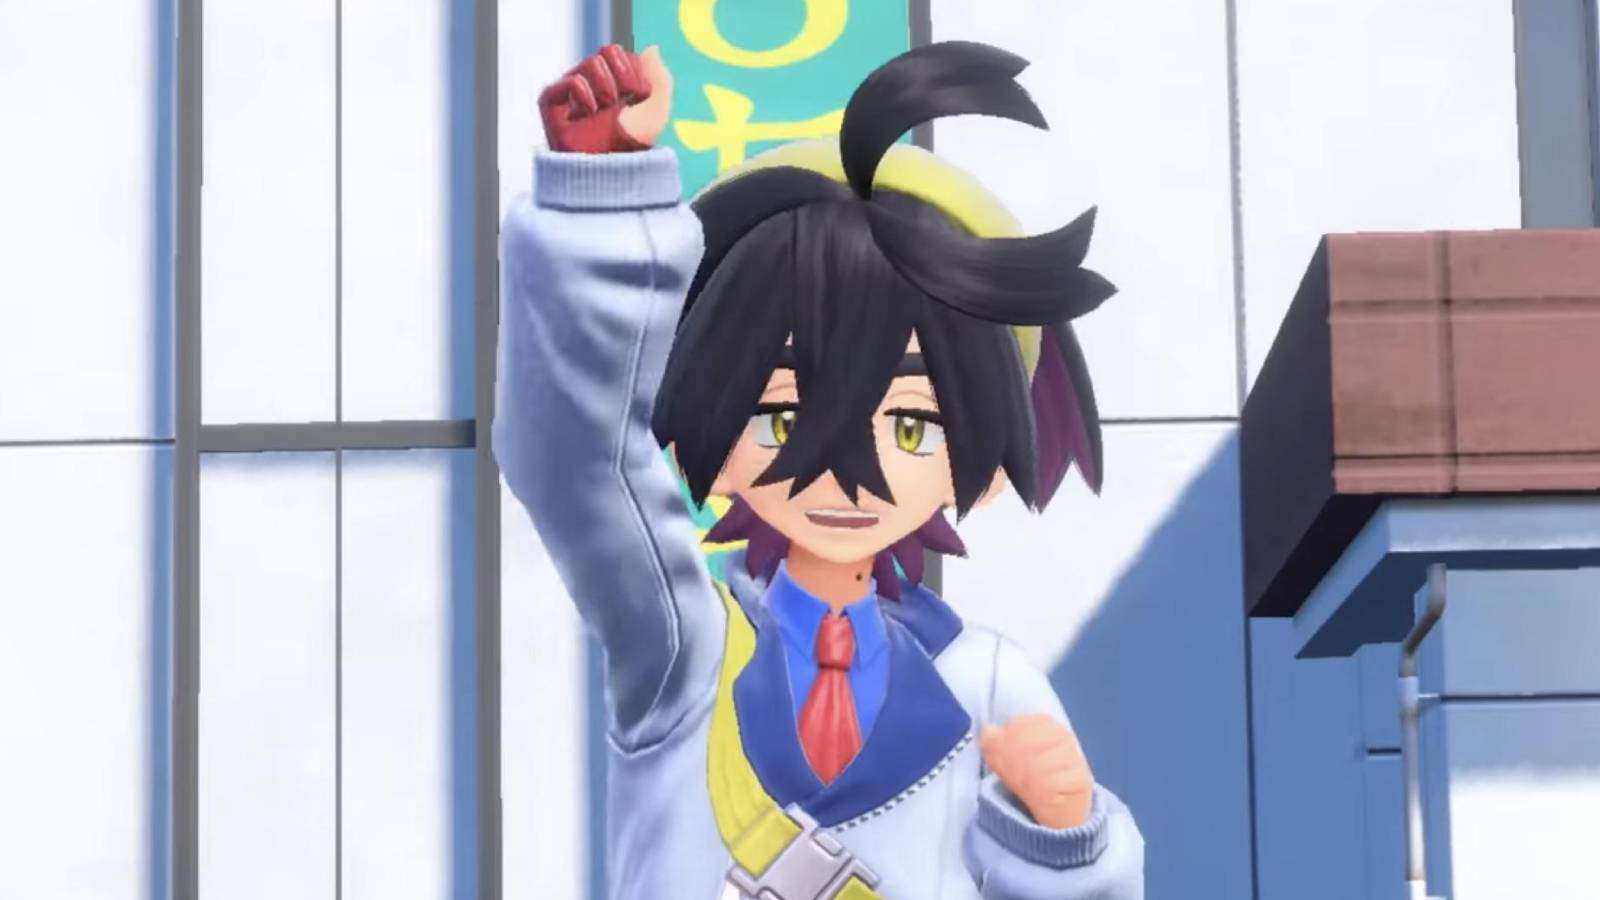 A screenshot from Pokemon Scarlet and Violet shows trainer Kieran lifting their right hand in the air triumphantly